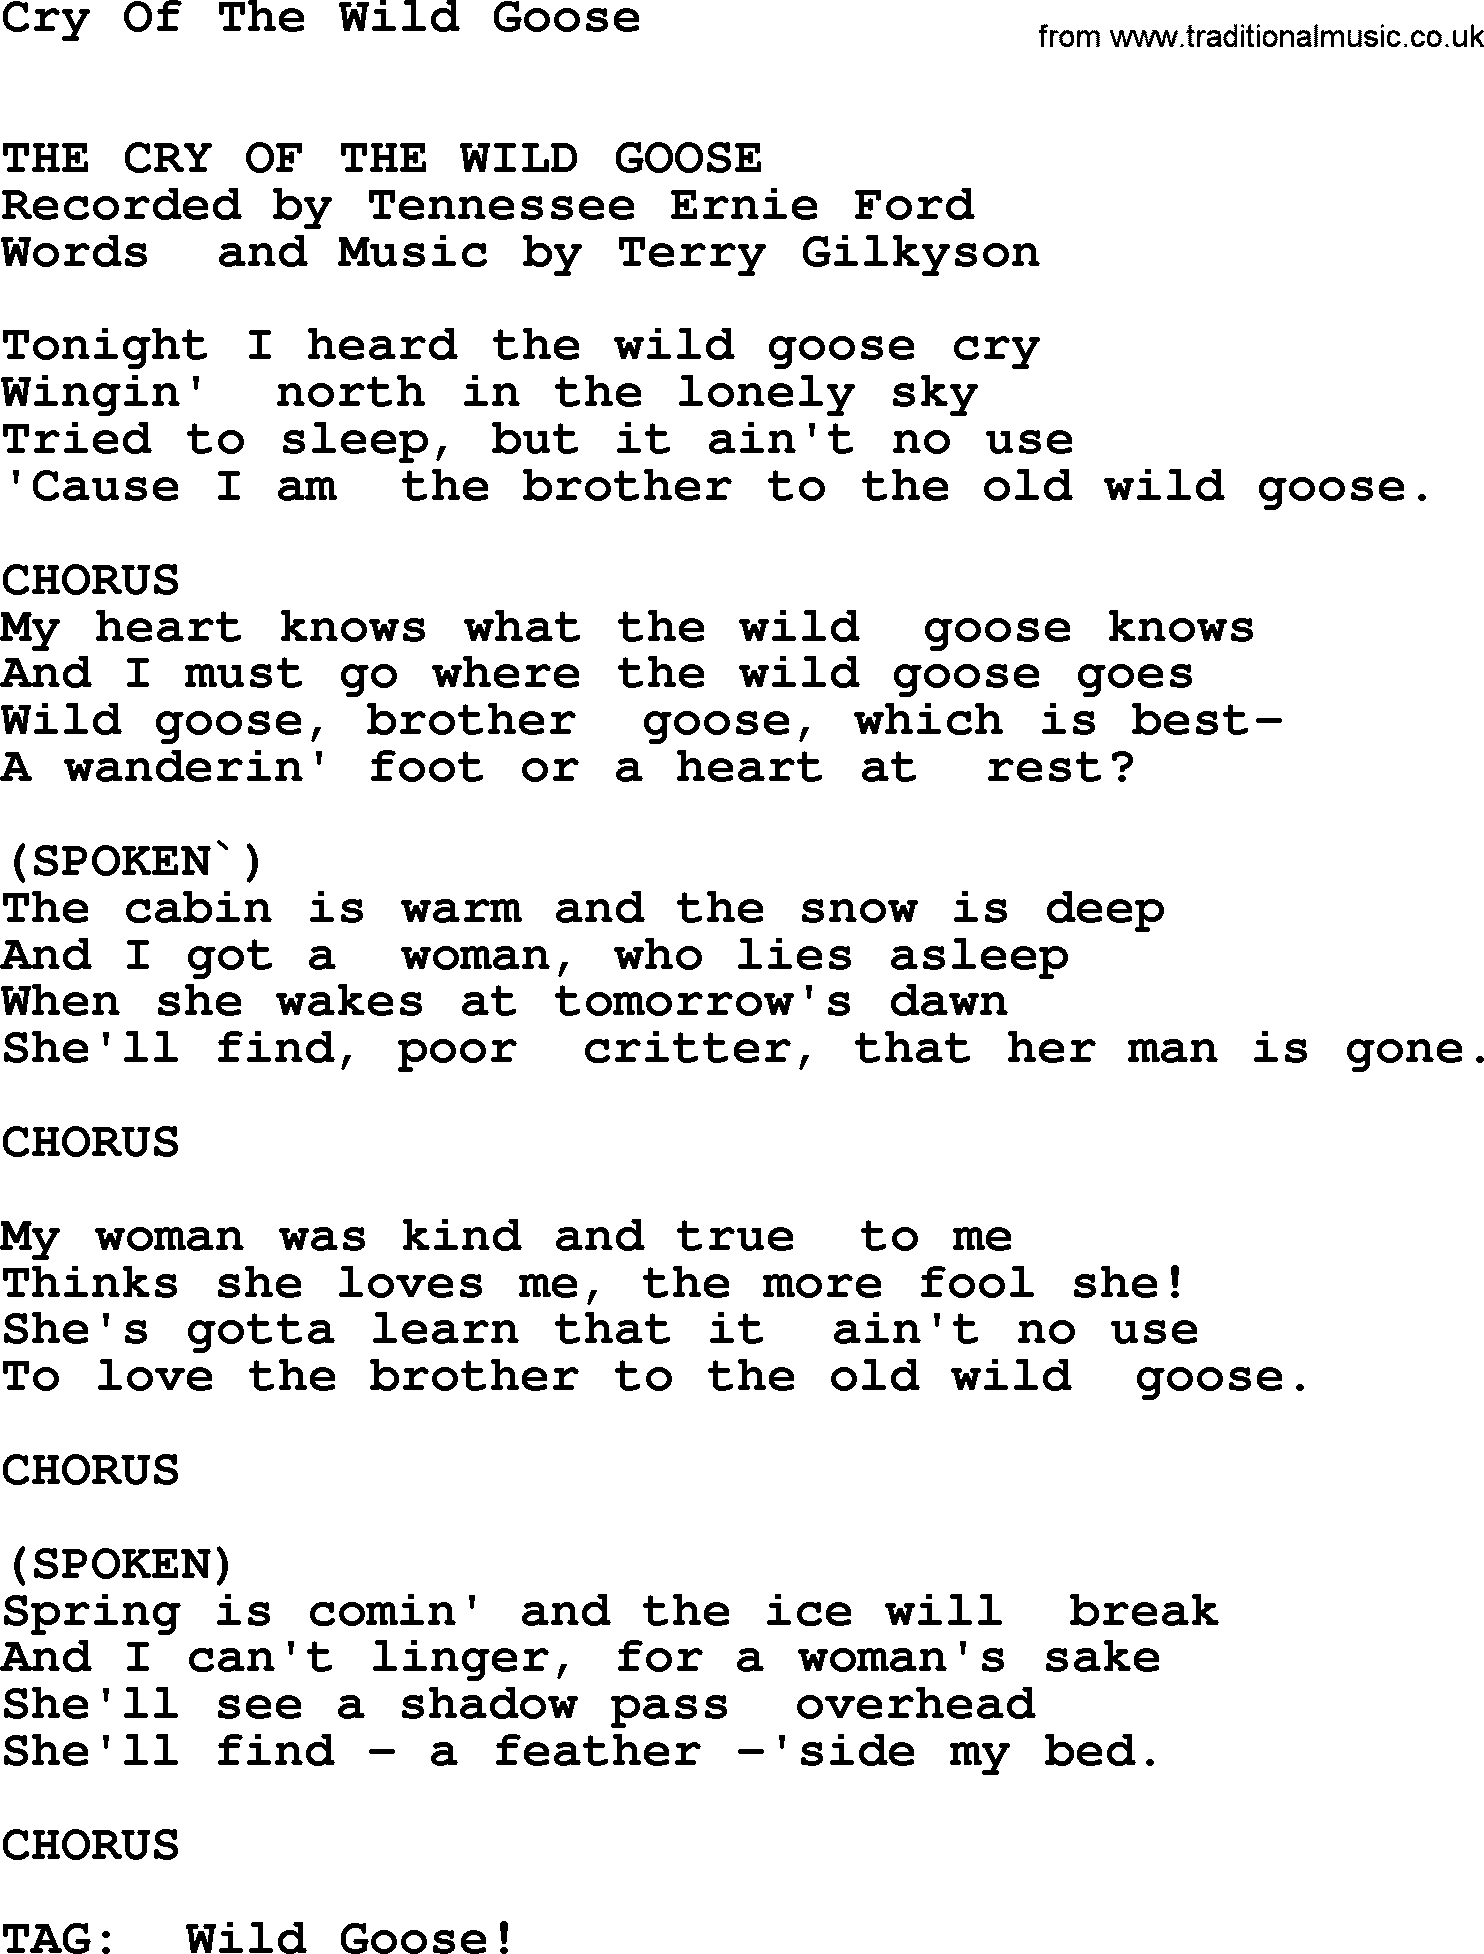 Bluegrass song: Cry Of The Wild Goose, lyrics and chords